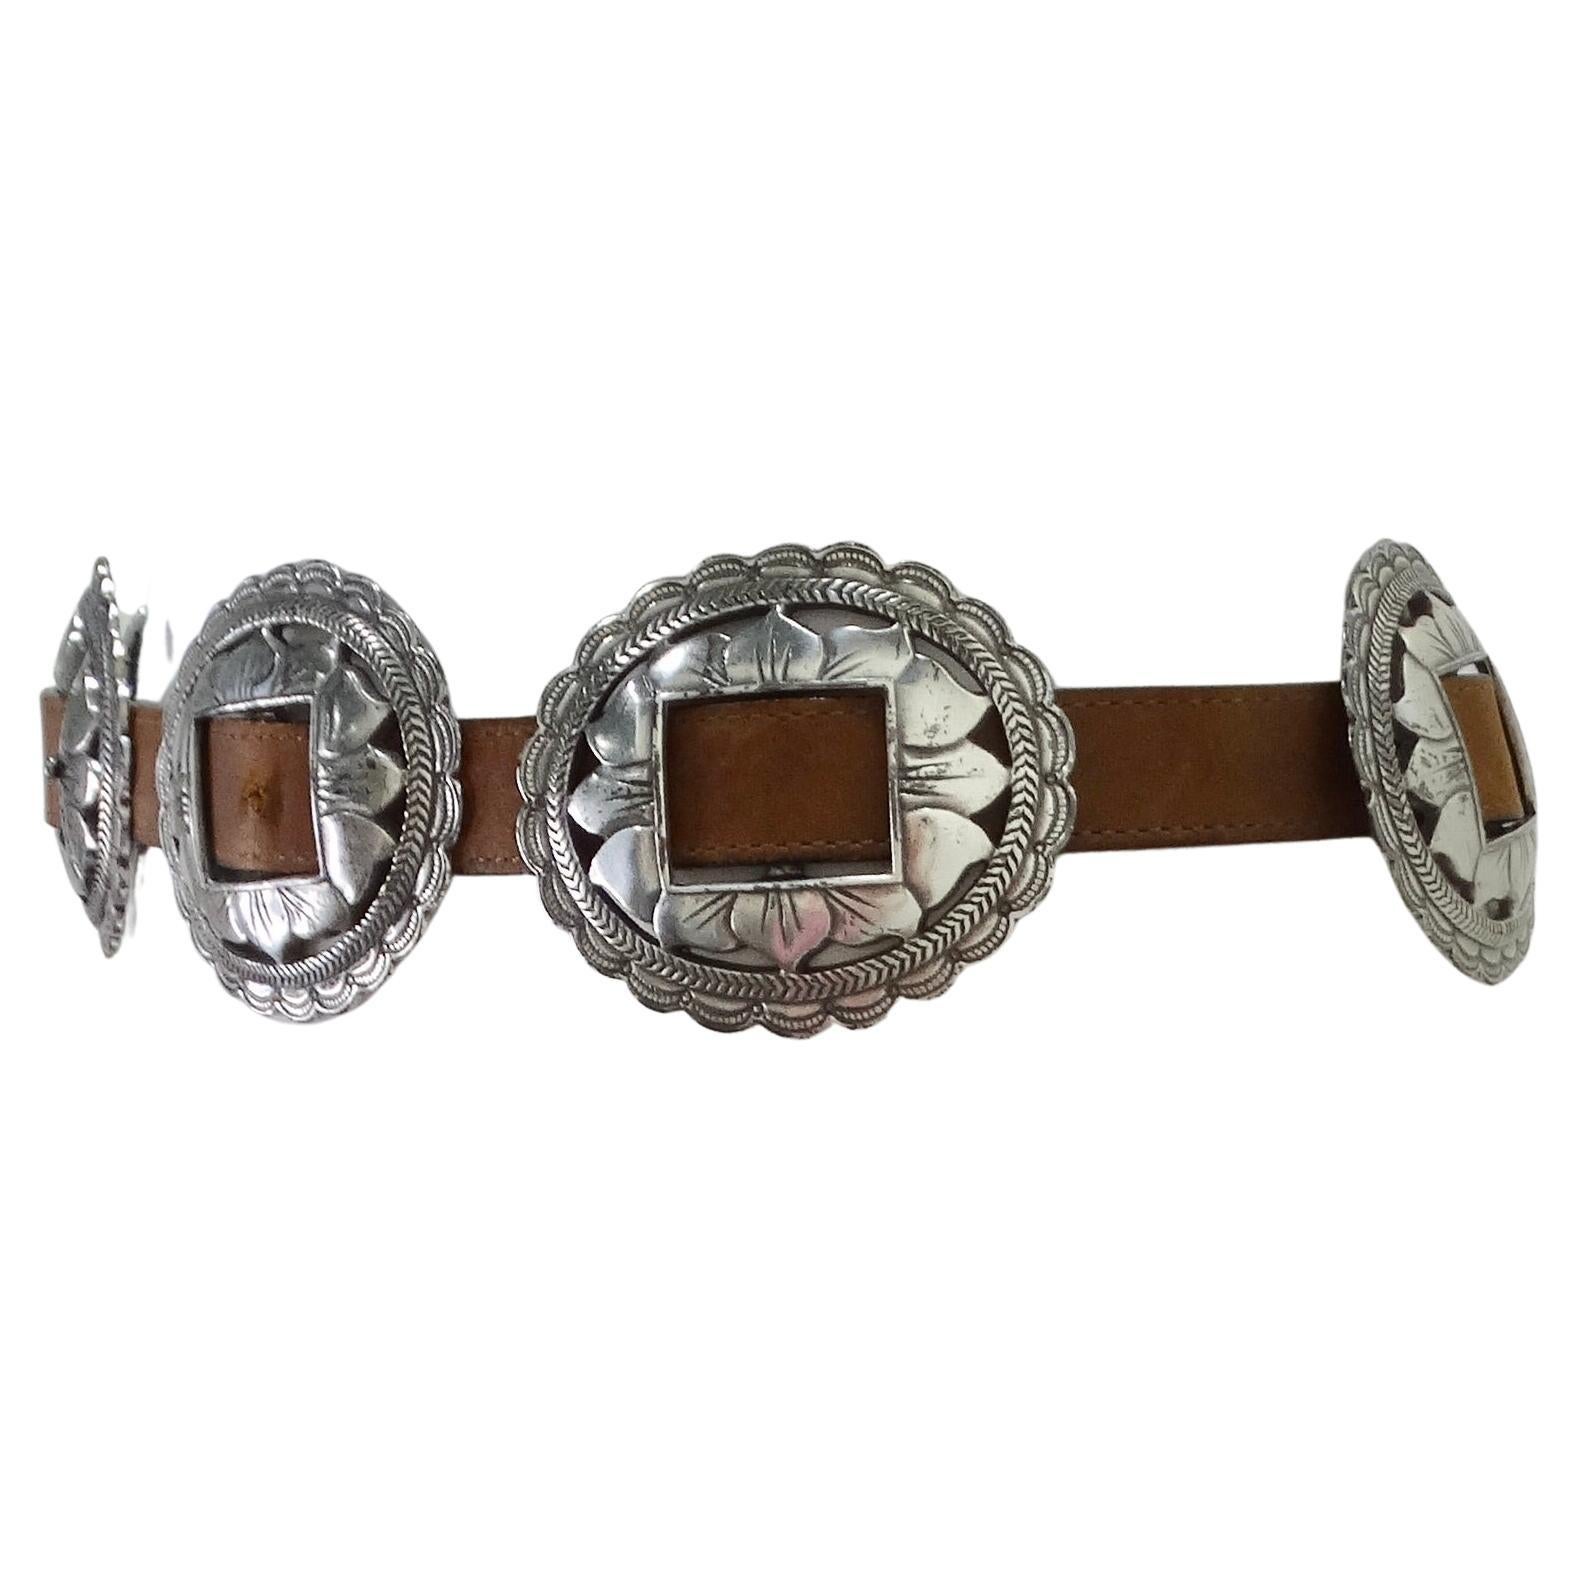 Elevate Your Style with the 1990s Brown Leather Belt! Step into the world of statement fashion with this exquisite 1990s Brown Leather Belt featuring silver-tone flower engraved buckles throughout. Crafted with meticulous attention to detail, this